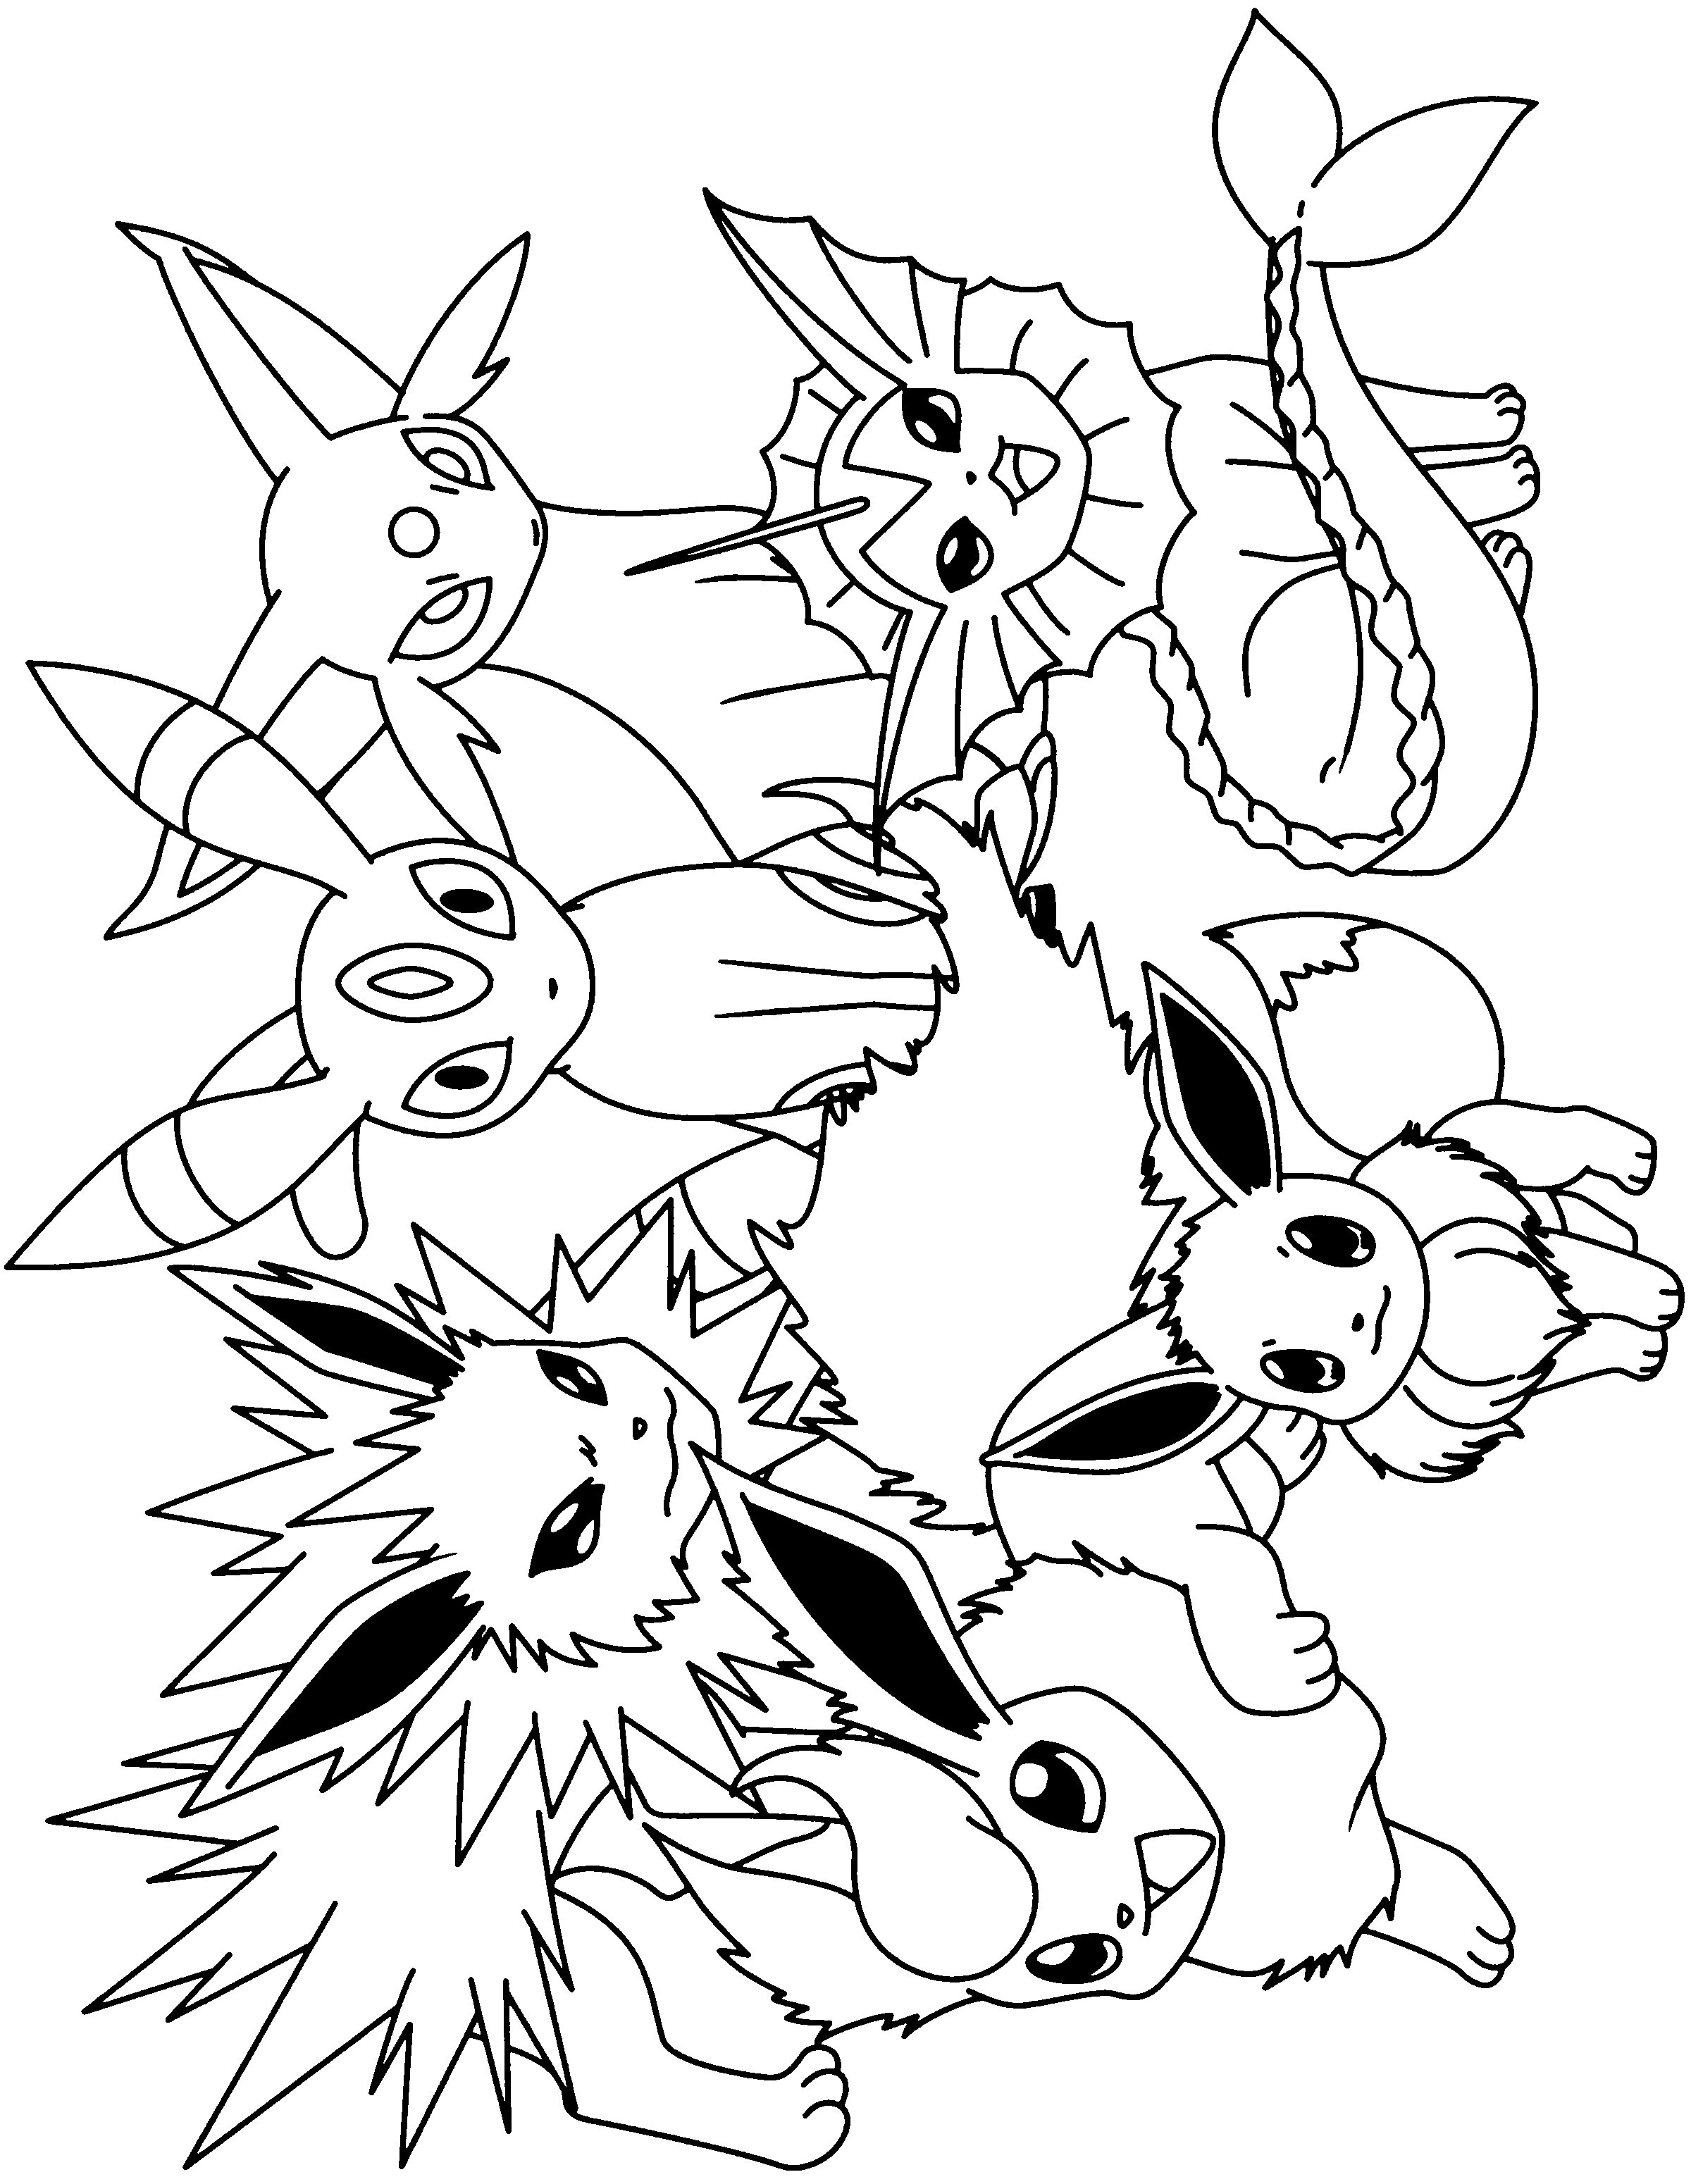 Printable Coloring Pages Of Pokemon